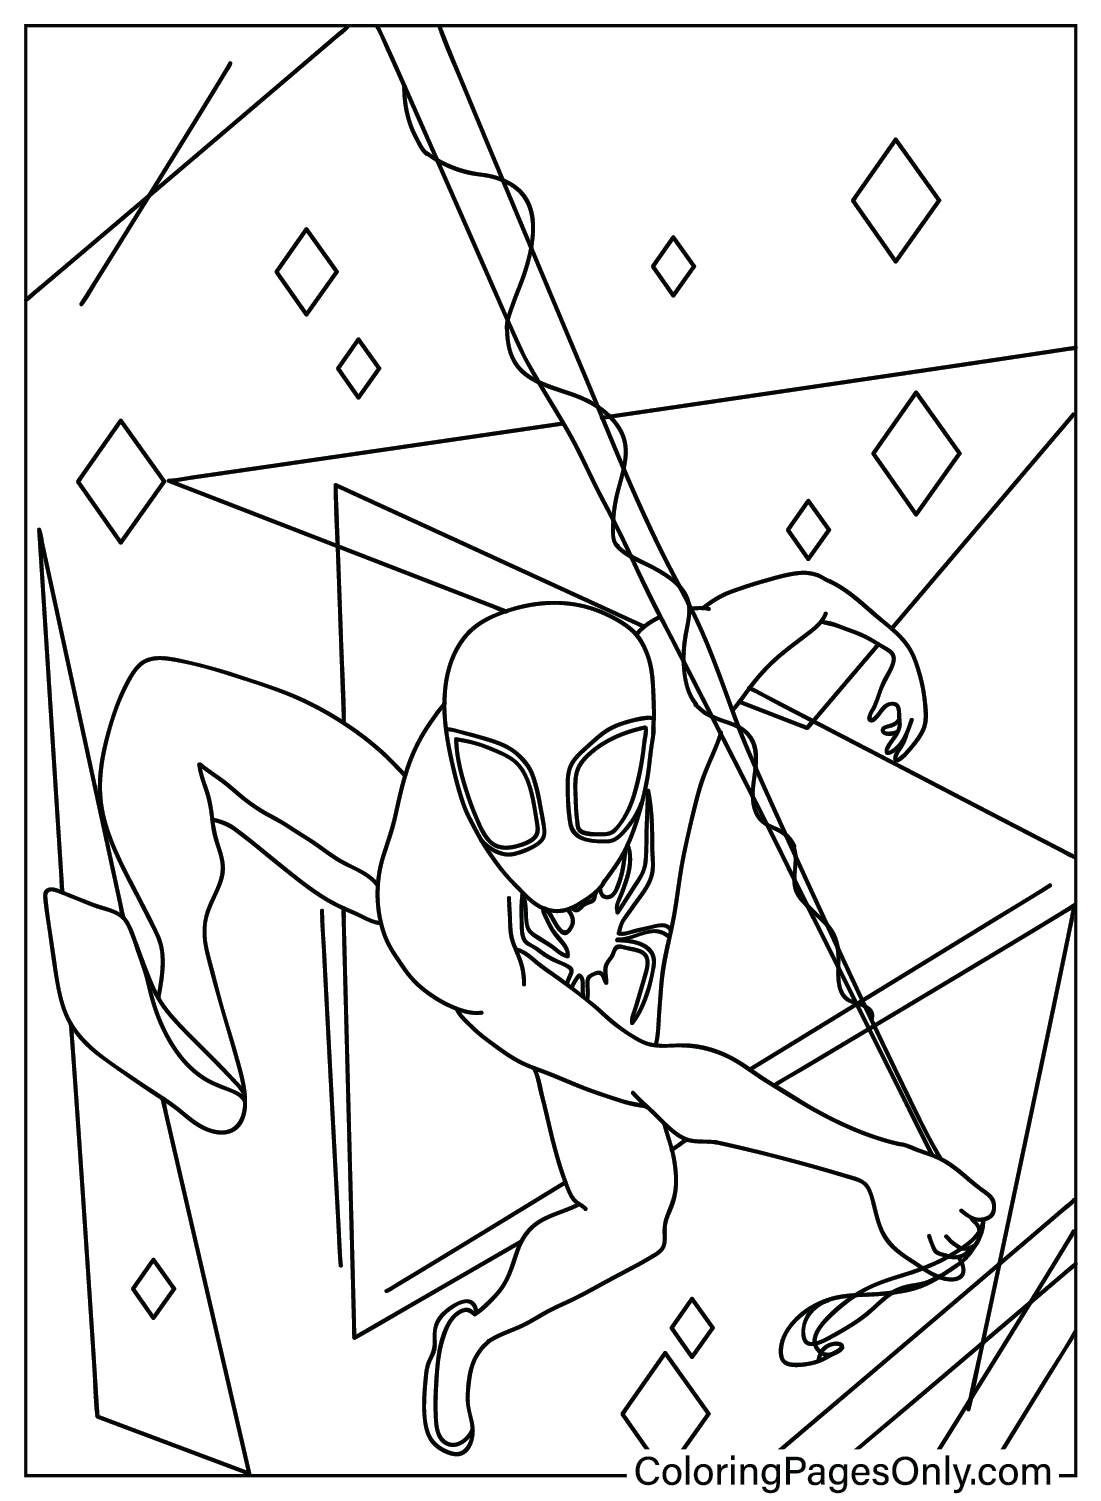 Spider-Man Across the Spider Images to Color from Spider-Man: Across the Spider